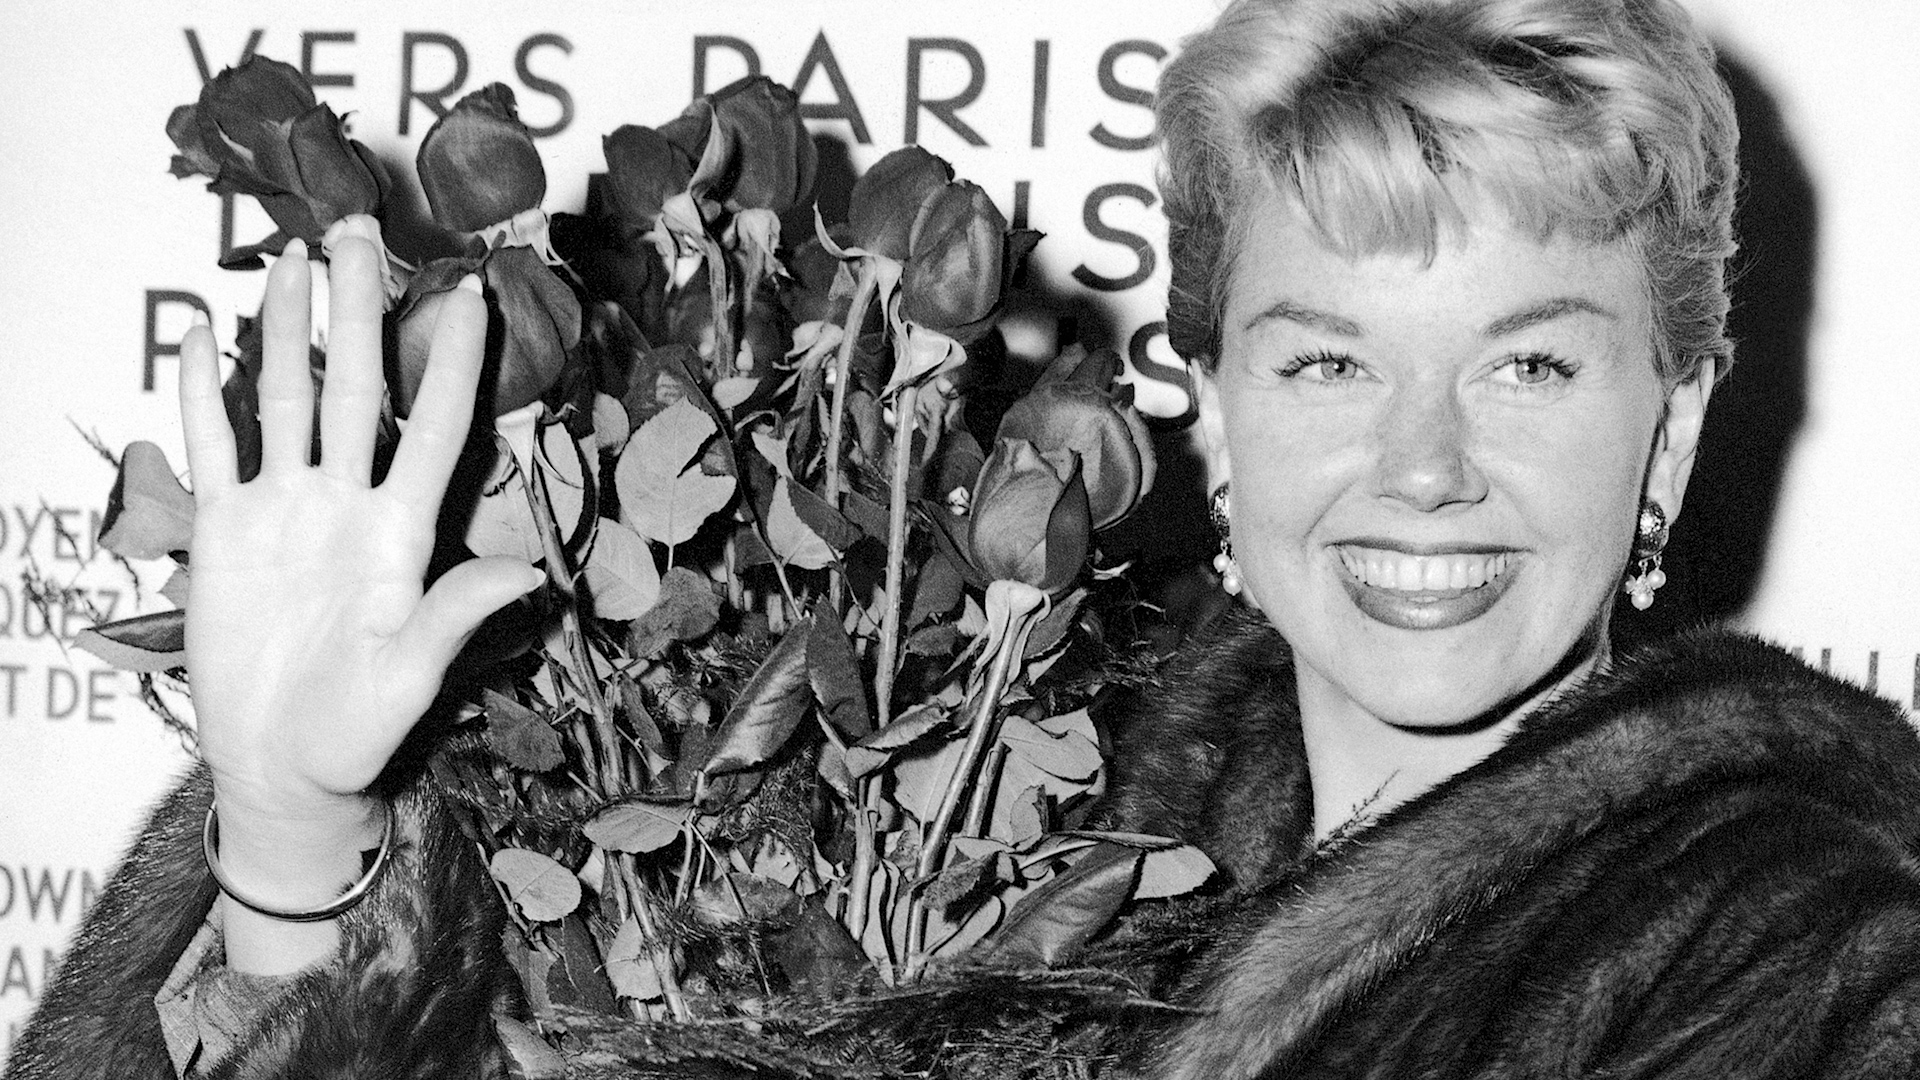 Doris Day, singer and perpetually chaste movie star of the 1950s and '60s,  dies at 97 - The Washington Post